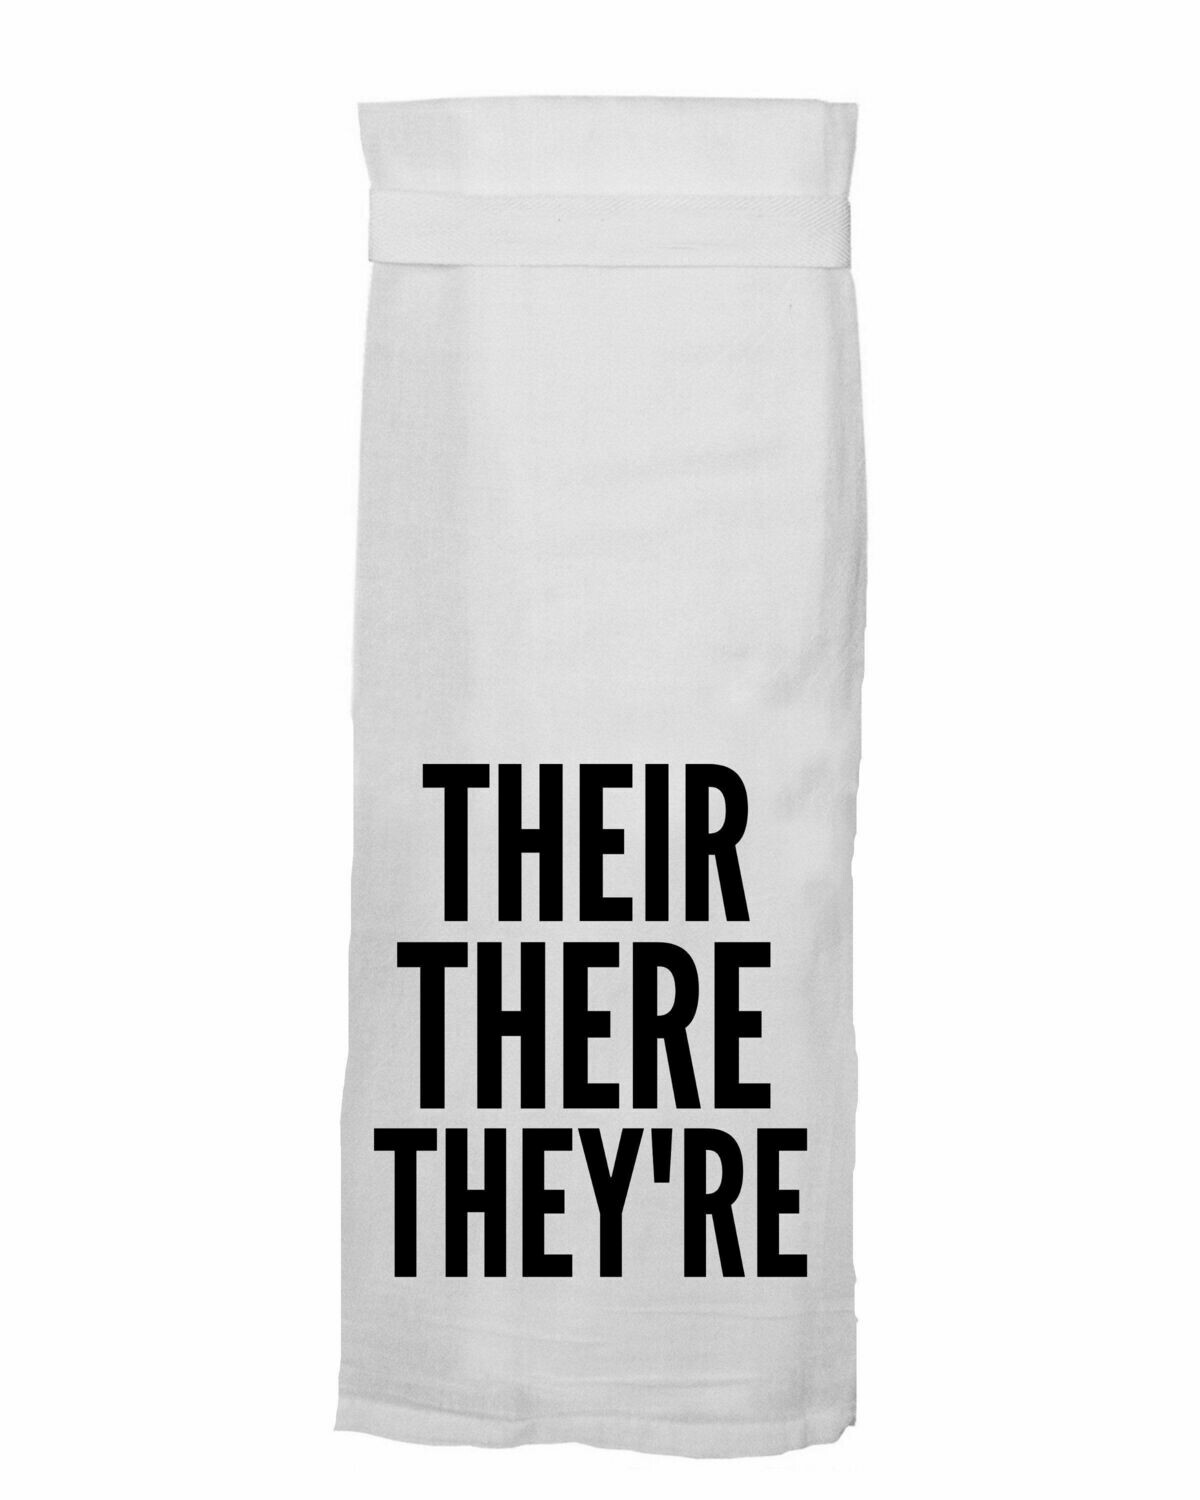 Their, There, They're - Towel